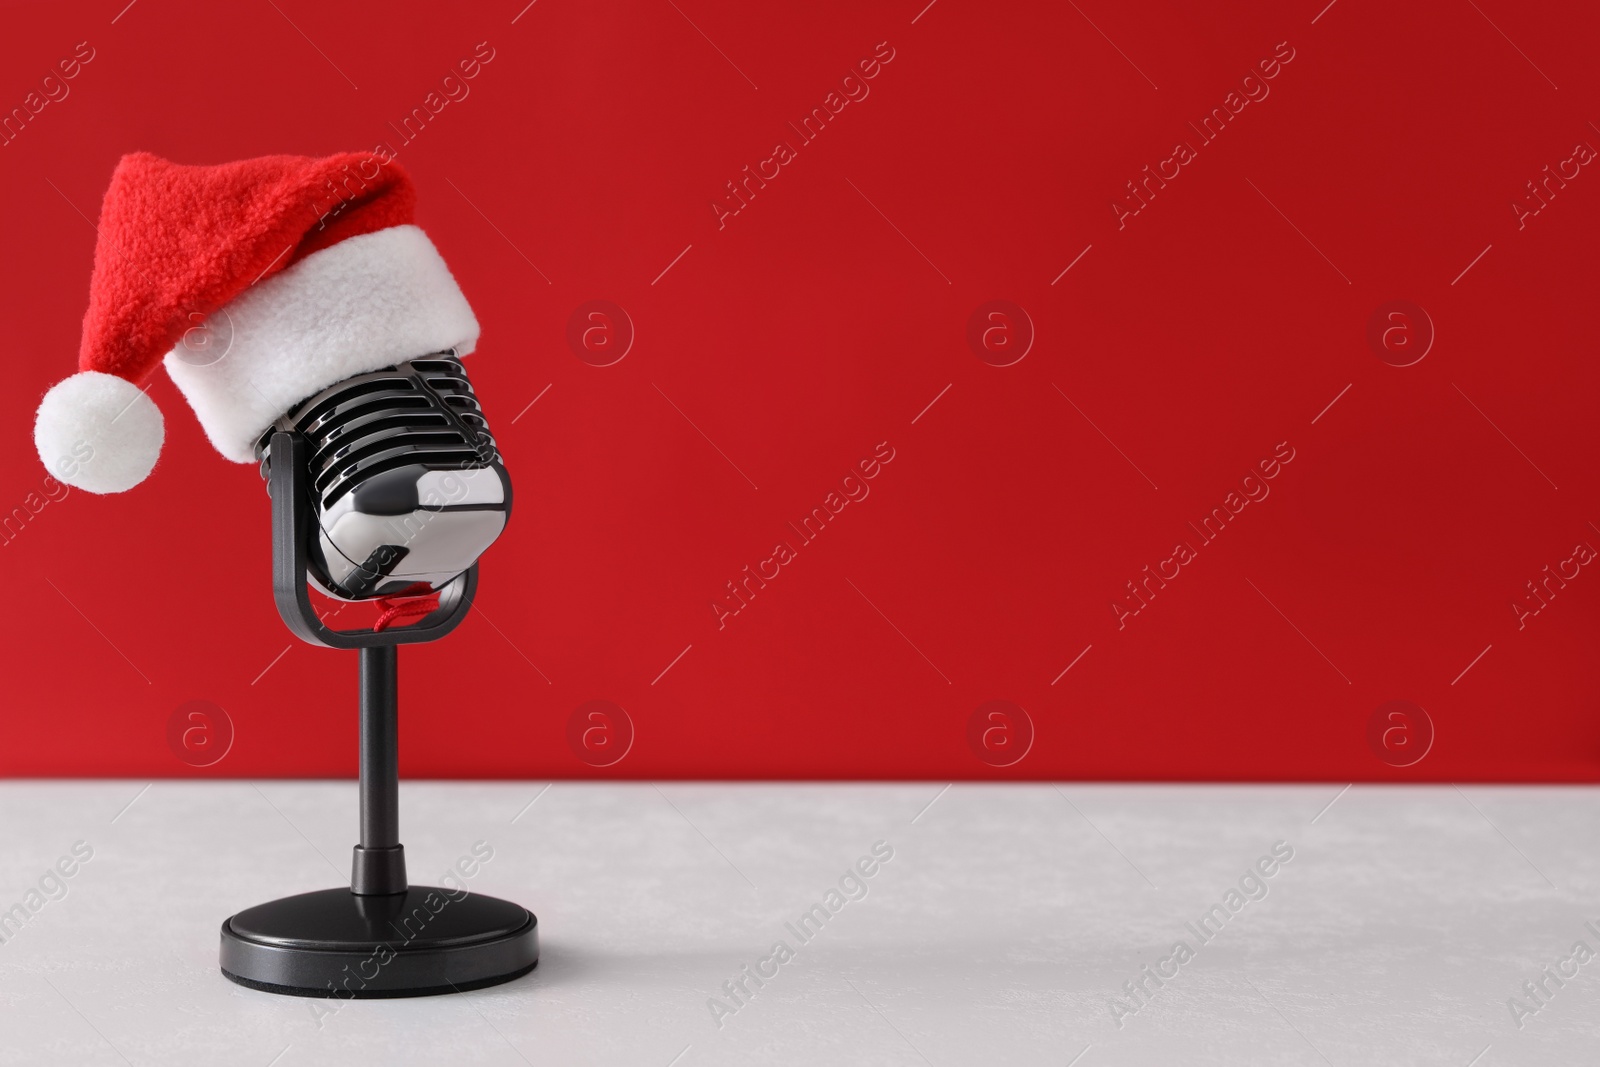 Photo of Retro microphone with Santa hat on table against red background, space for text. Christmas music